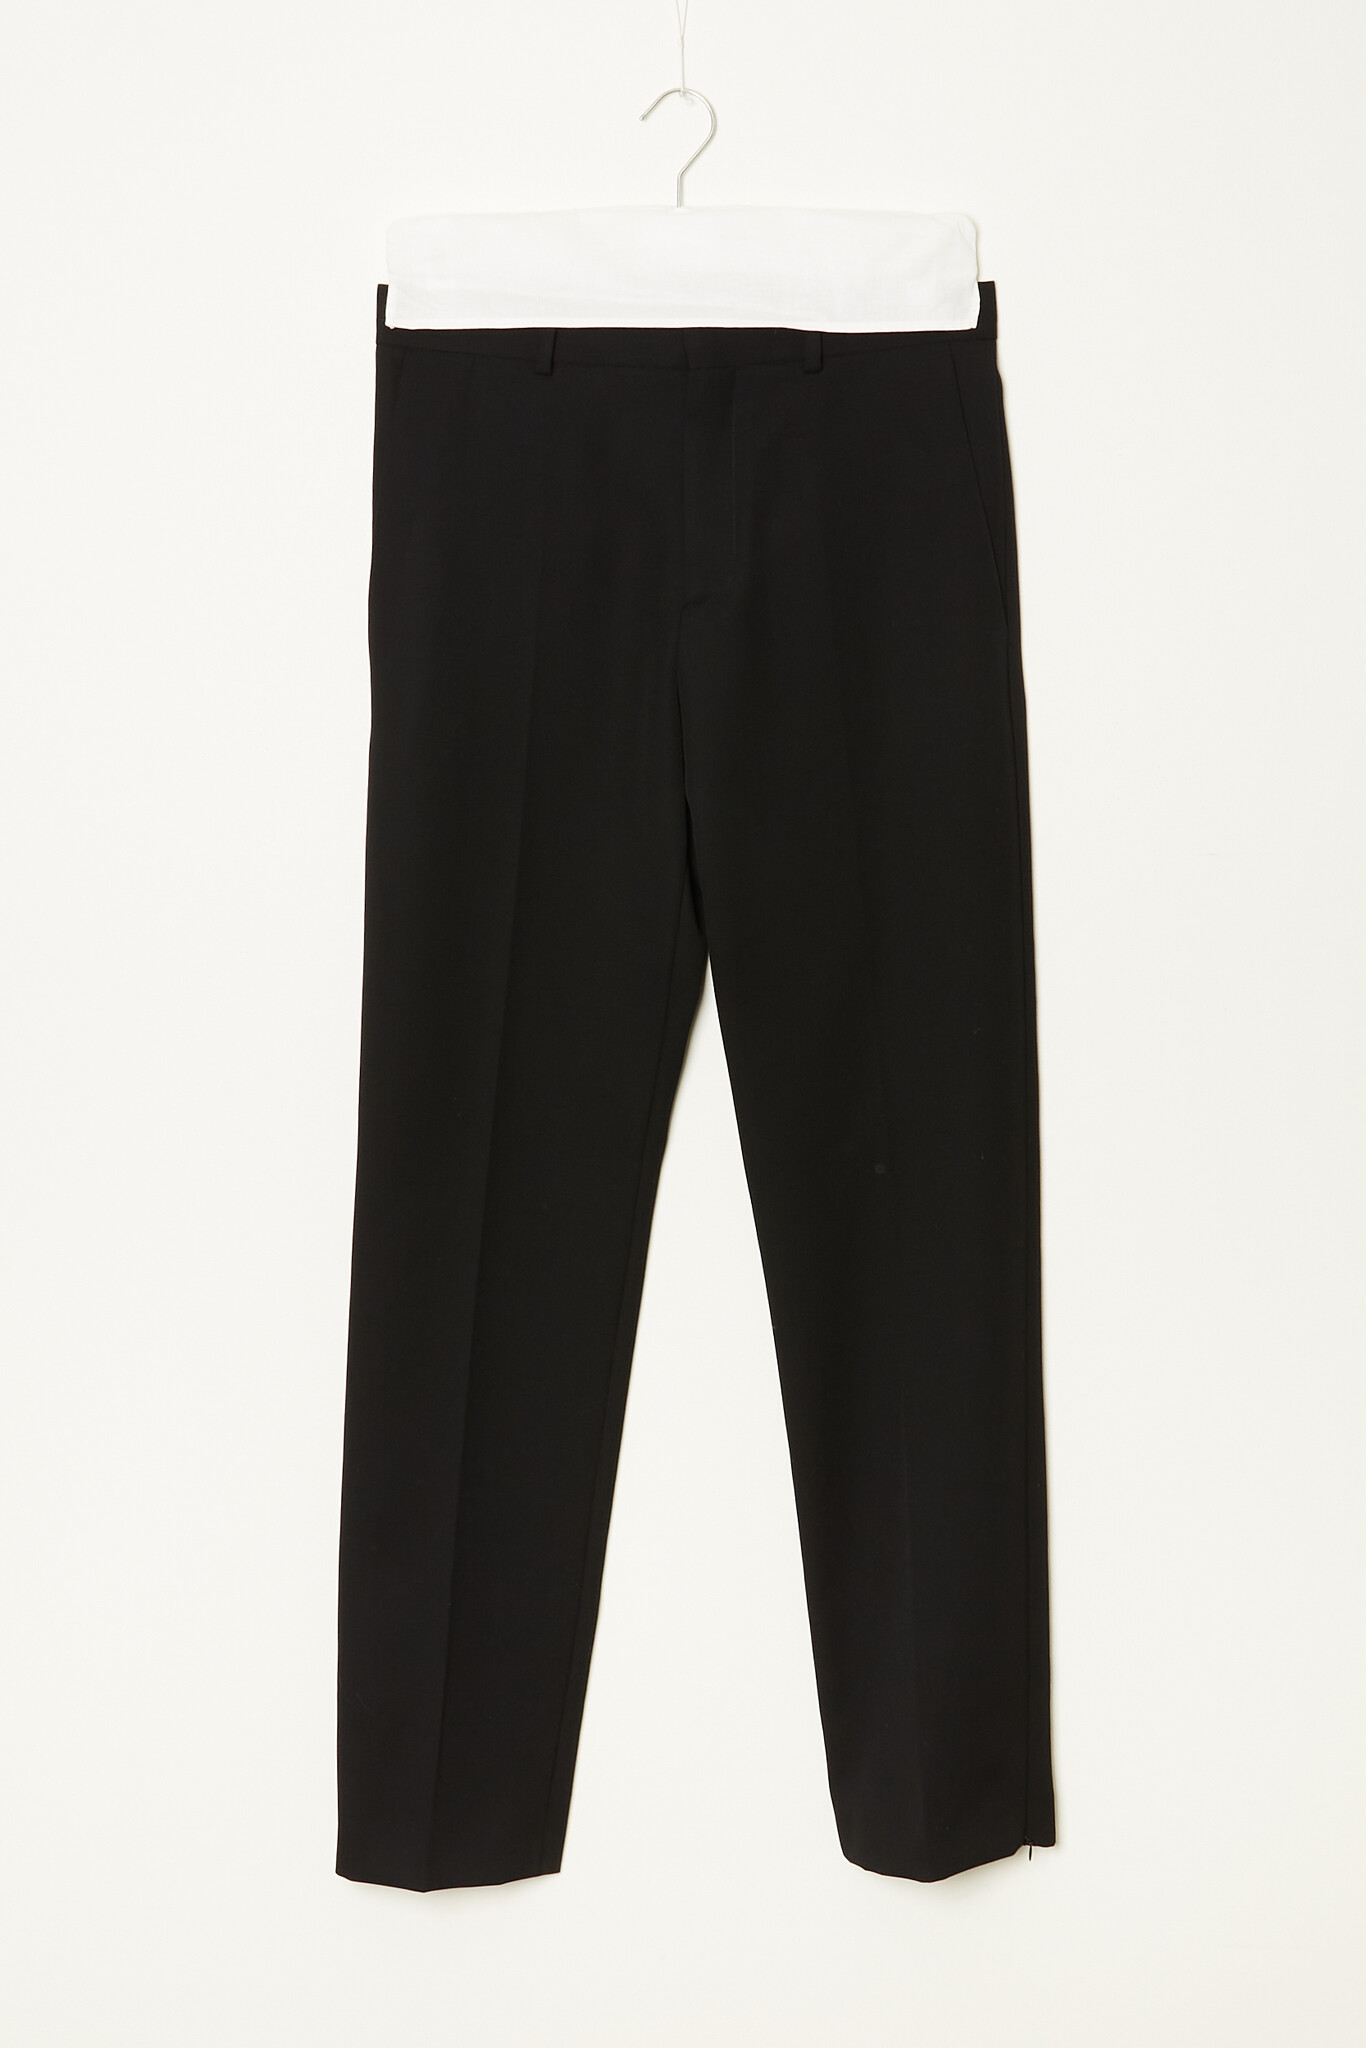 Botter - Slim fit trousers